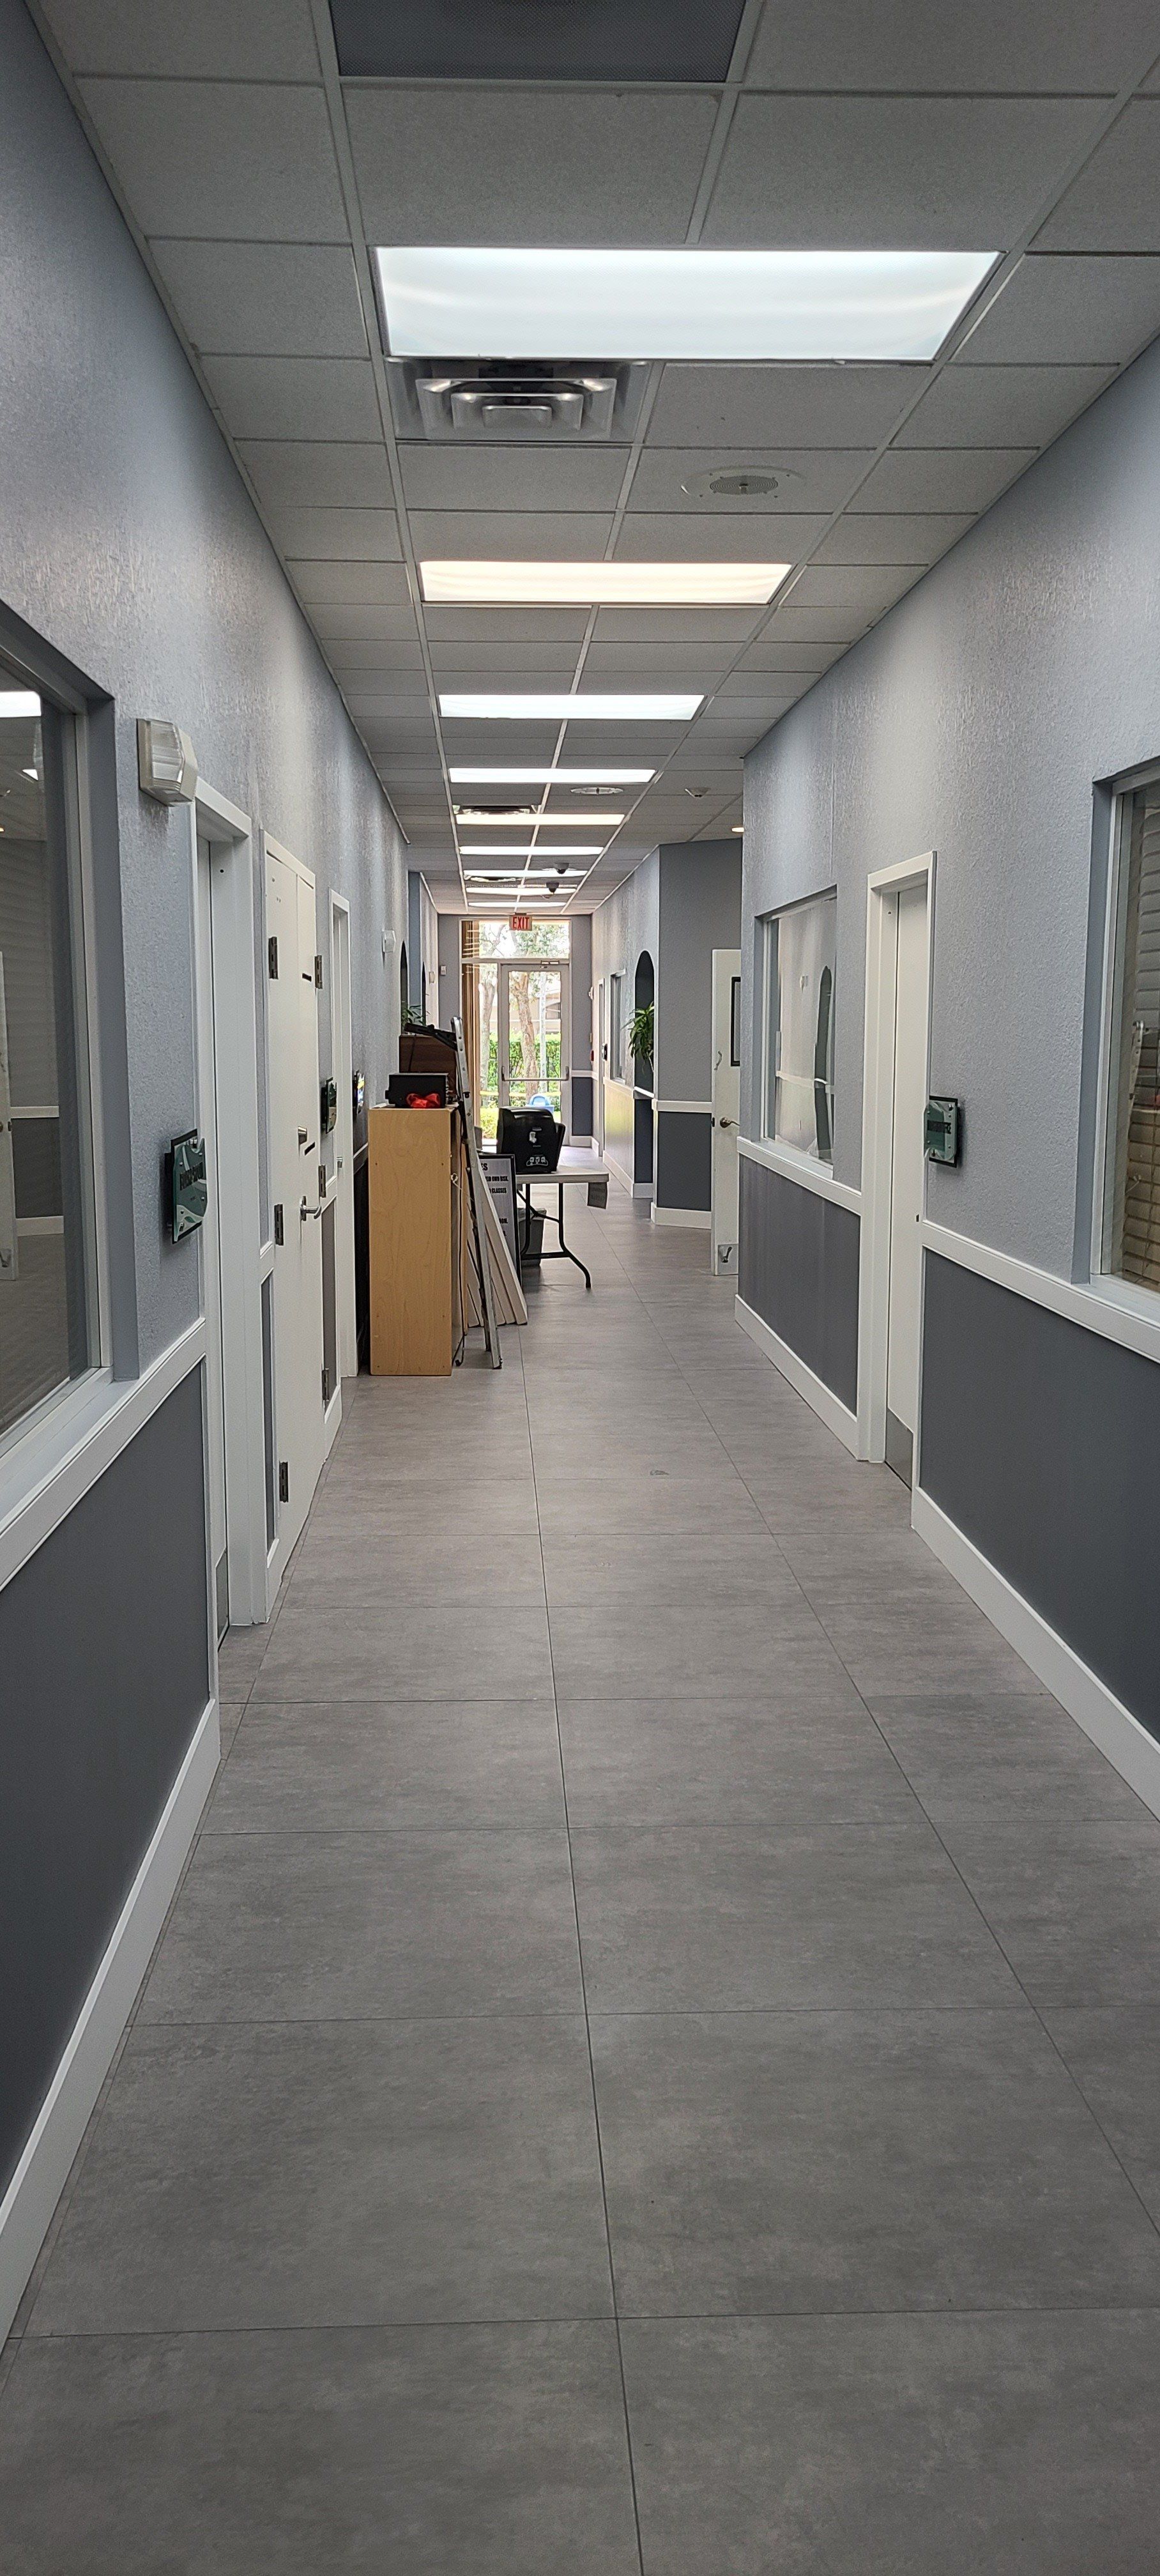 Interior office - commercial painting Hollywood, FL.
